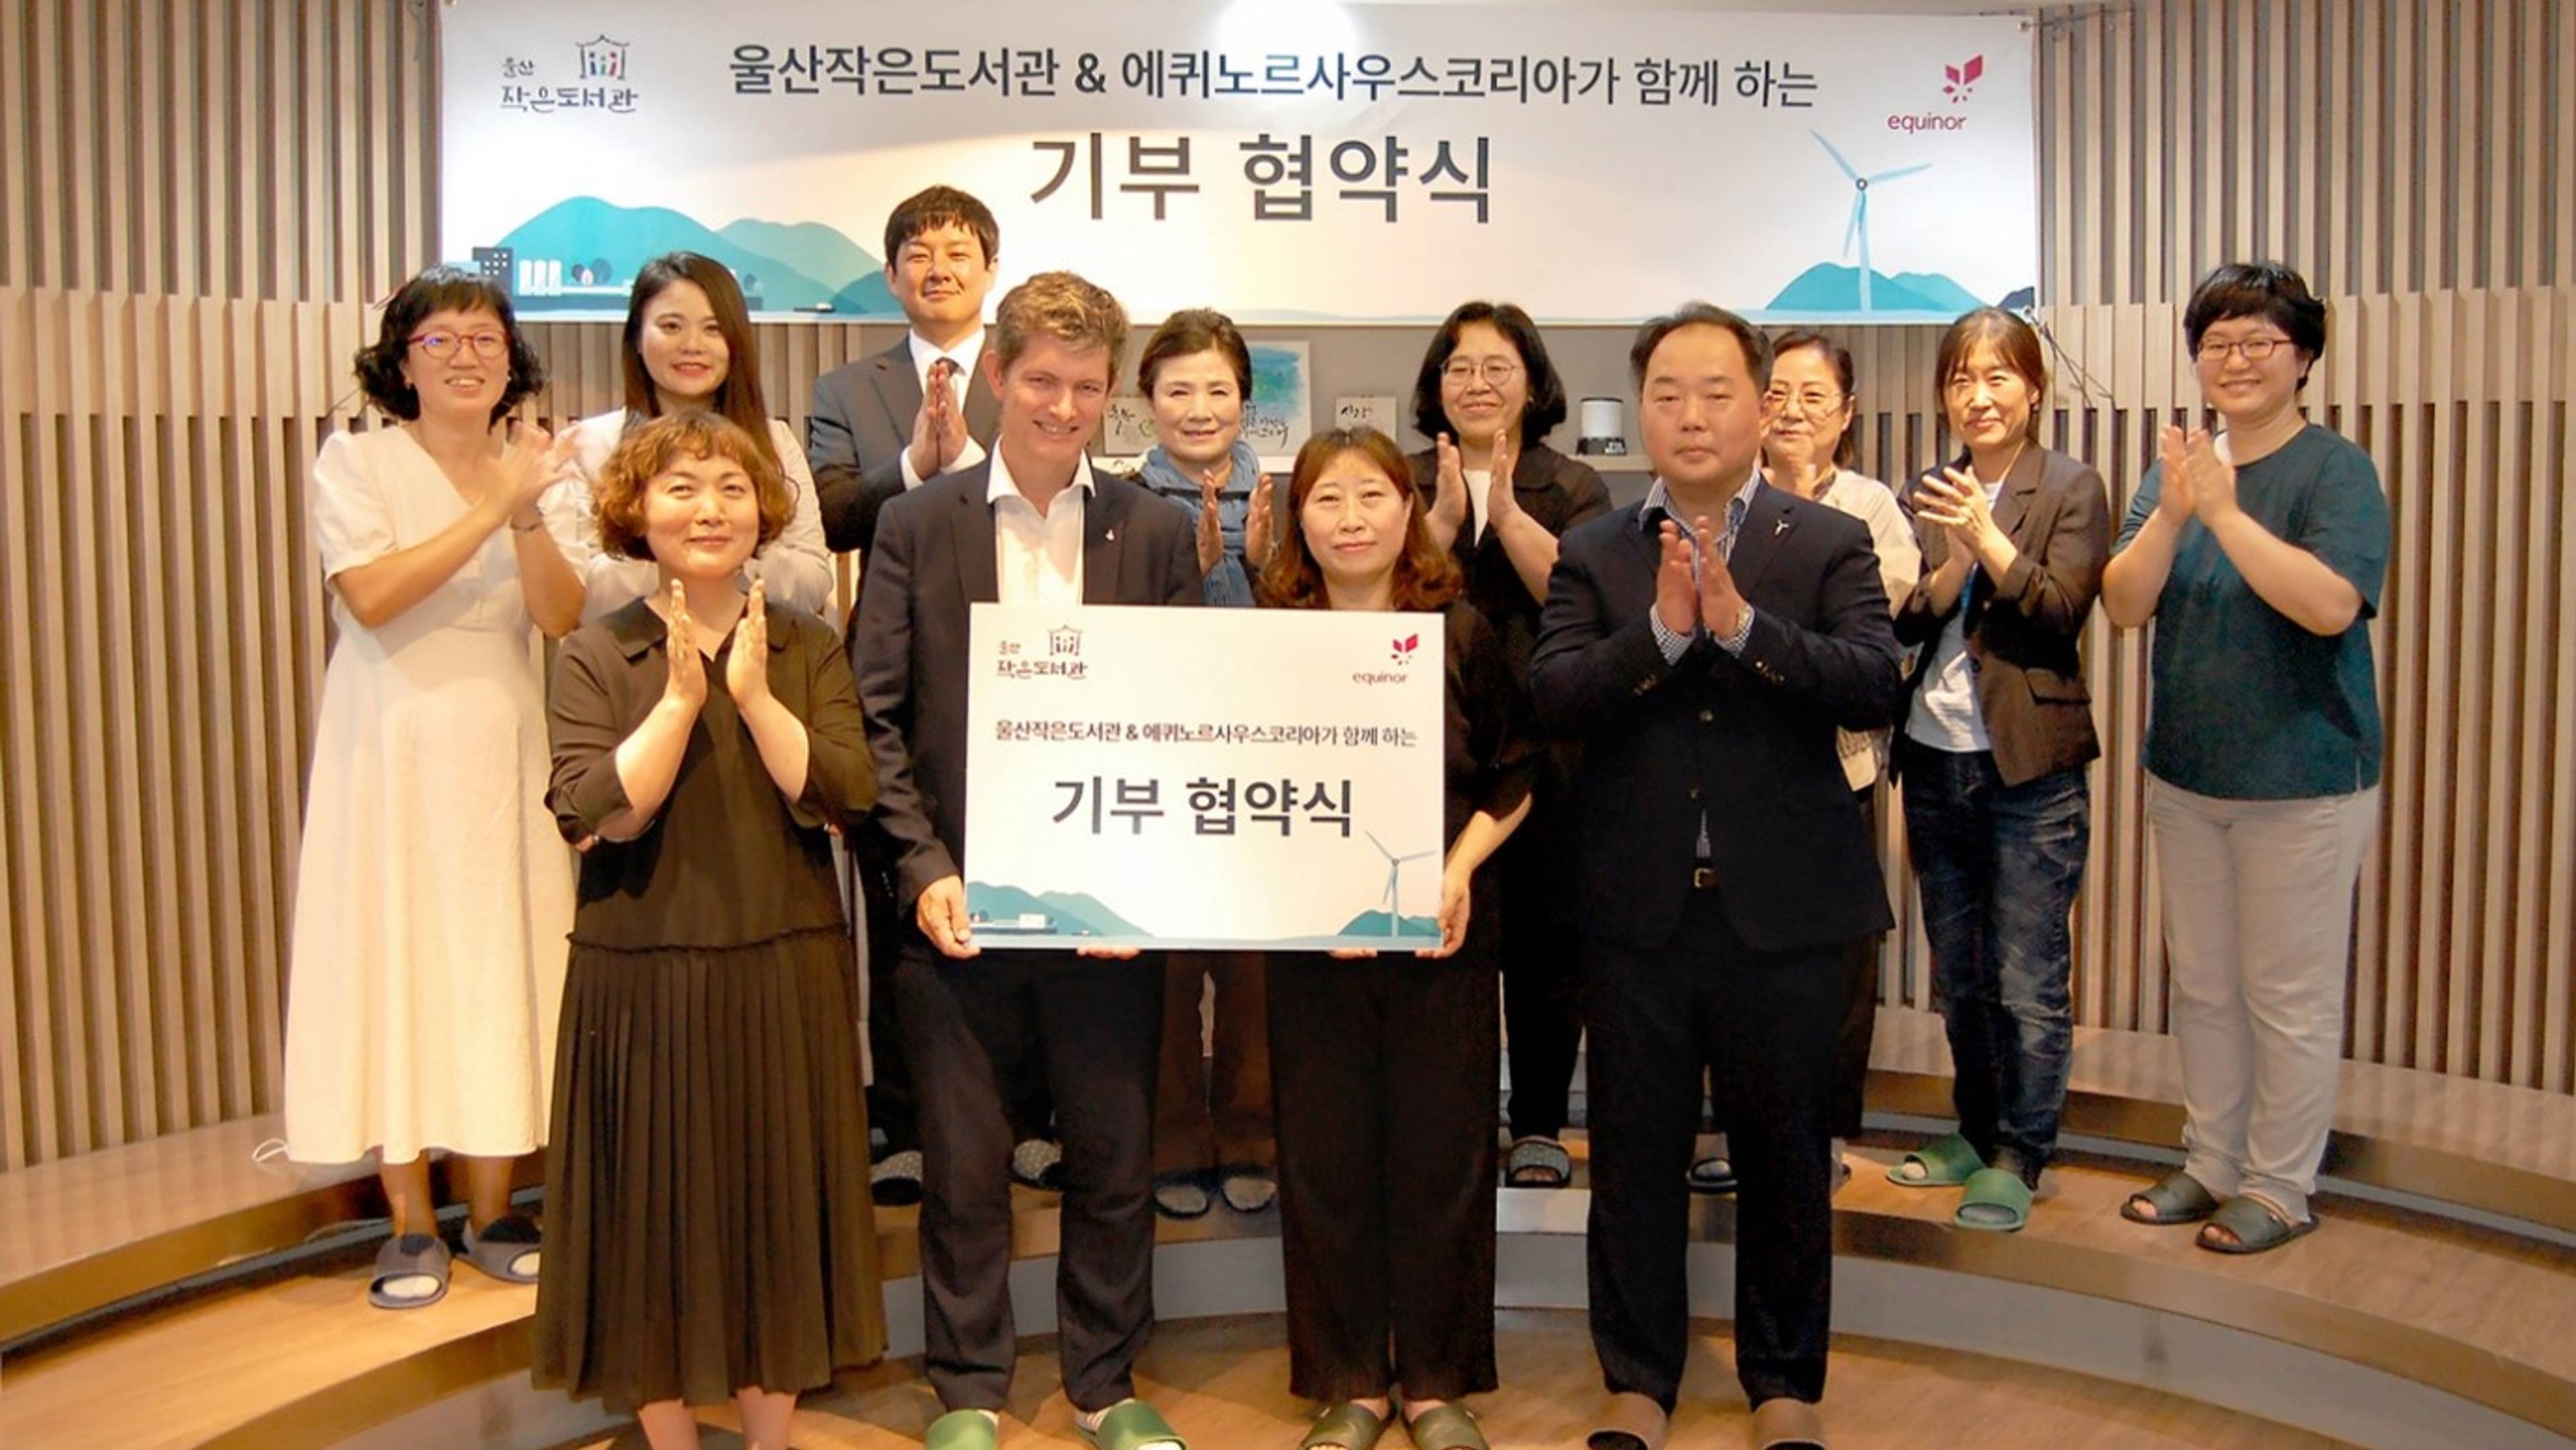 Group picture where Equinor Korea (Country Managing Director Jacques-Etienne Michel) has held a donation agreement ceremony in Ulsan Serin Library, donating books and book sterilizers to Ulsan Small Library Association